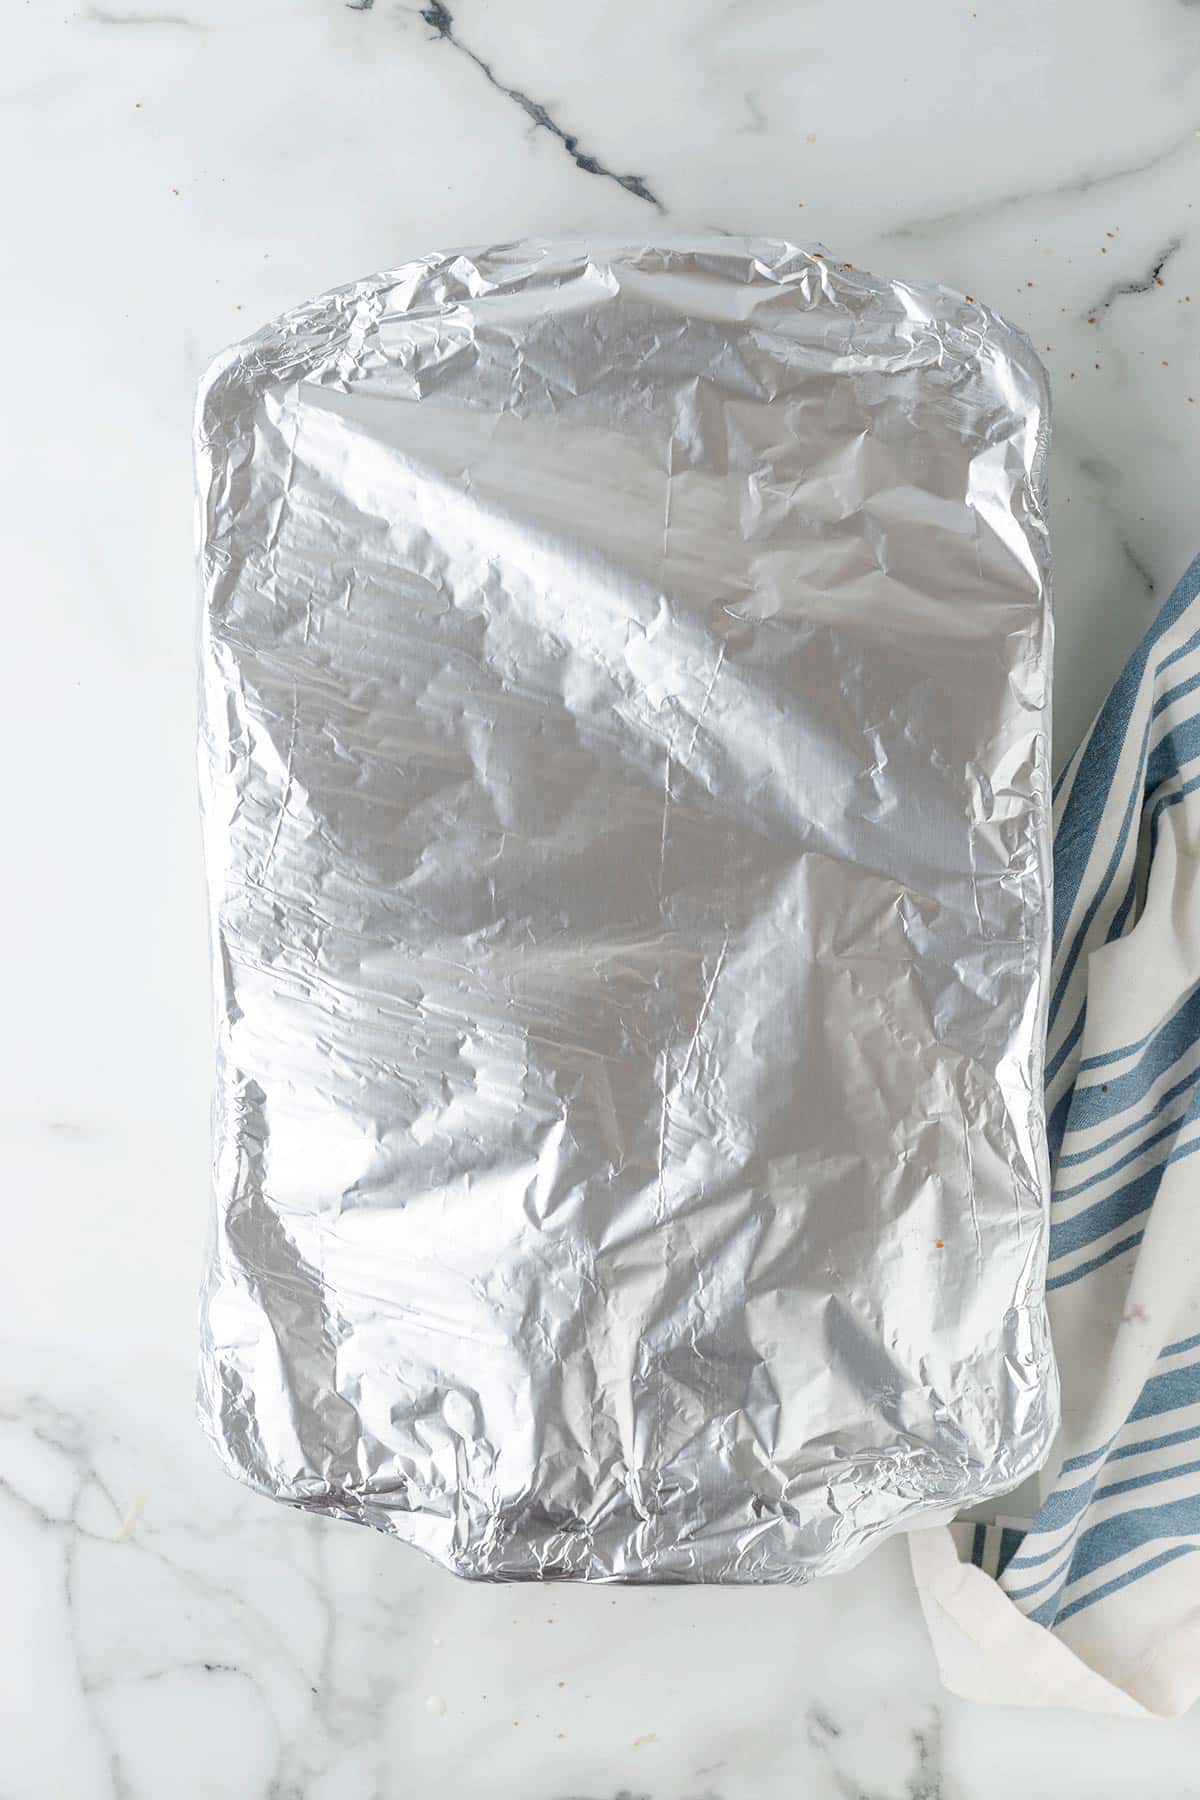 the baking dish covered with foil.